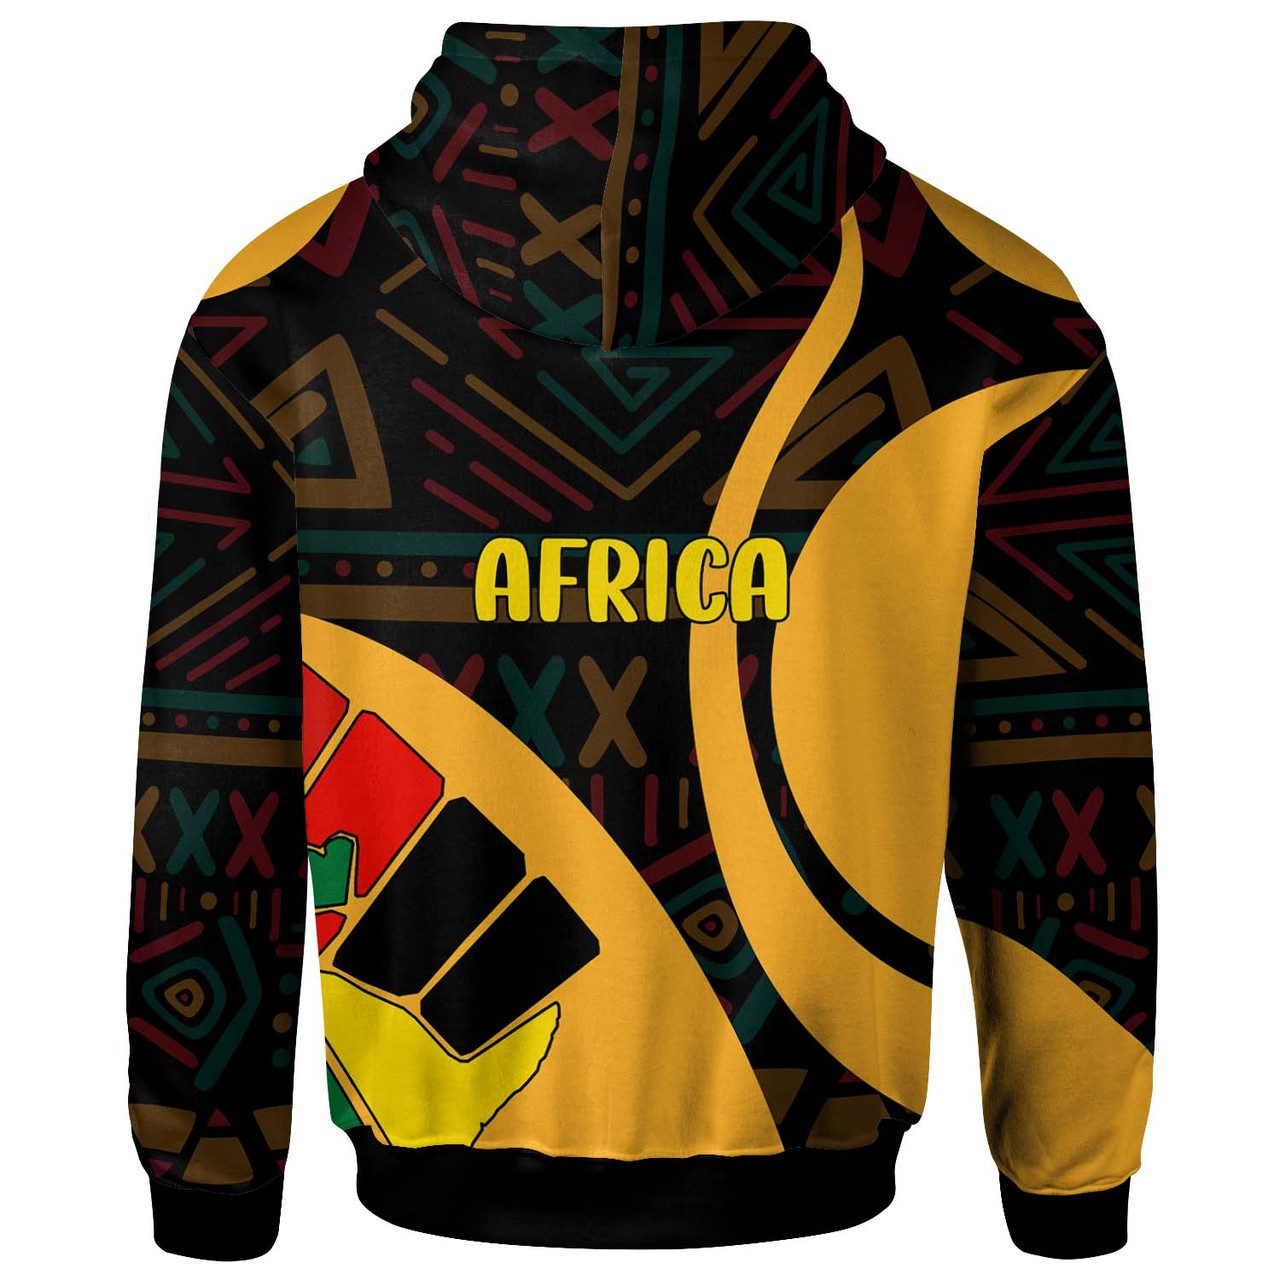 African Hoodie – Celebrate Africa’s Woman’s Day with Ethnic Patterns Hoodie